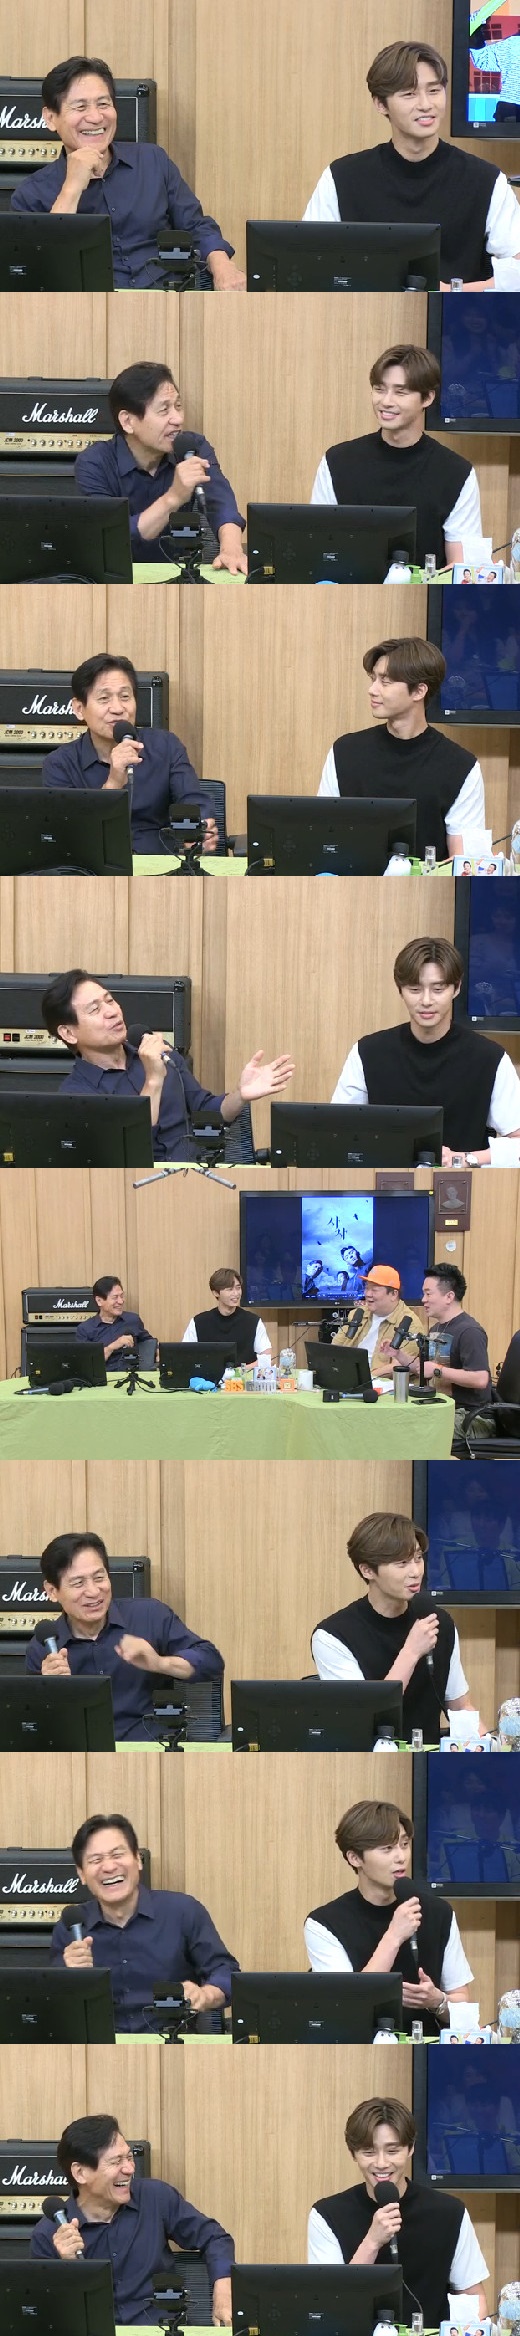 Park Seo-joon and Ahn Sung-ki of Lion attracted the attention of the preliminary audience with their witty dedication at Dooshi Escape TV Cultwo Show.On the afternoon of the 16th, SBS Power FM Dooshi Escape TV Cultwo Show appeared as a guest by Park Seo-joon and Ahn Sung-ki, the main characters of the movie Lion.The Lion, which is set to open on the 31st, is a film about fighting champion Yonghu (Park Seo-joon) meeting with the Kuma priest Anshinbu (Ahn Sung-ki) to confront the powerful evil (), which has confused the world.On Lion, Park Seo-joon wittyly introduced Its not that lion of Lion King; Lion is a lion called by God.The martial arts champion who rejects God meets the bride and confronts strong evil.Ahn Sung-ki emphasized the various charms, saying, There is a scary, tense, and there is a fun part with a birdie movie format.Park Seo-joon played the role of a martial arts champion who faced evil in the play, and he played a hot role: I have once played a martial arts player character in Drama.I was trained at that time, so I was able to prepare in a relatively short period of time. He also expressed his respect for his senior Ahn Sung-ki, saying, We are seniors of our seniors. This year, Korean movies celebrated their 100th anniversary, and it is a living history of the film industry.Park Seo-joon said, So I was nervous and nervous before I met my senior, but I was so comfortable that I was able to finish the lion well without any problems.Ahn Sung-ki talked about Park Seo-joons anti-war charm: Park Seo-joon is very funny, but if you stay still, you look scared and scared.It looks cold and cold, and when you laugh, you will see a childlike innocent figure. He also mentioned Woo Do-hwan of the black existence Jishin station that spreads evil.Woo Do-hwan gives a strong impression, said Ahn Sung-ki. There are many action gods like Park Seo-joon.In particular, Park Seo-joon promised to appear as a special DJ, attracting attention.He said, If lion is the first in real-time search terms, please come back as a special DJ. He said, If it does not hurt, I will come out as a special DJ.Ahn Sung-ki also said, I will do Park Seo-joon.